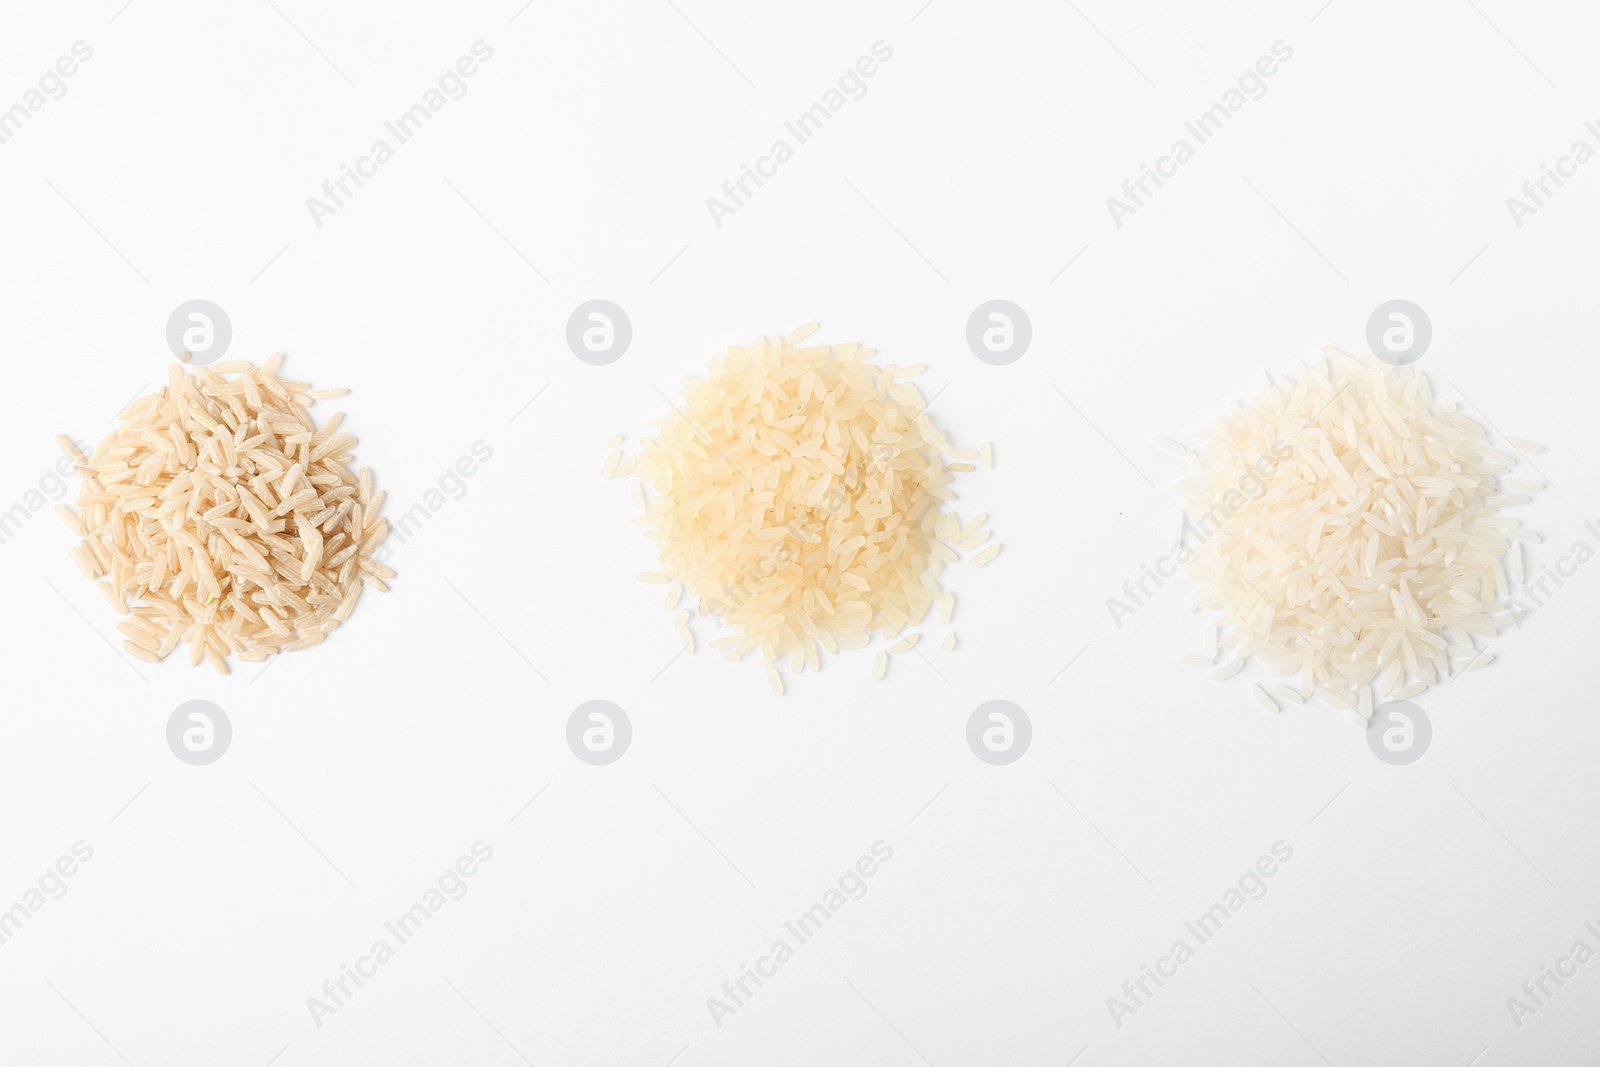 Photo of Different types of uncooked rice on white background, top view